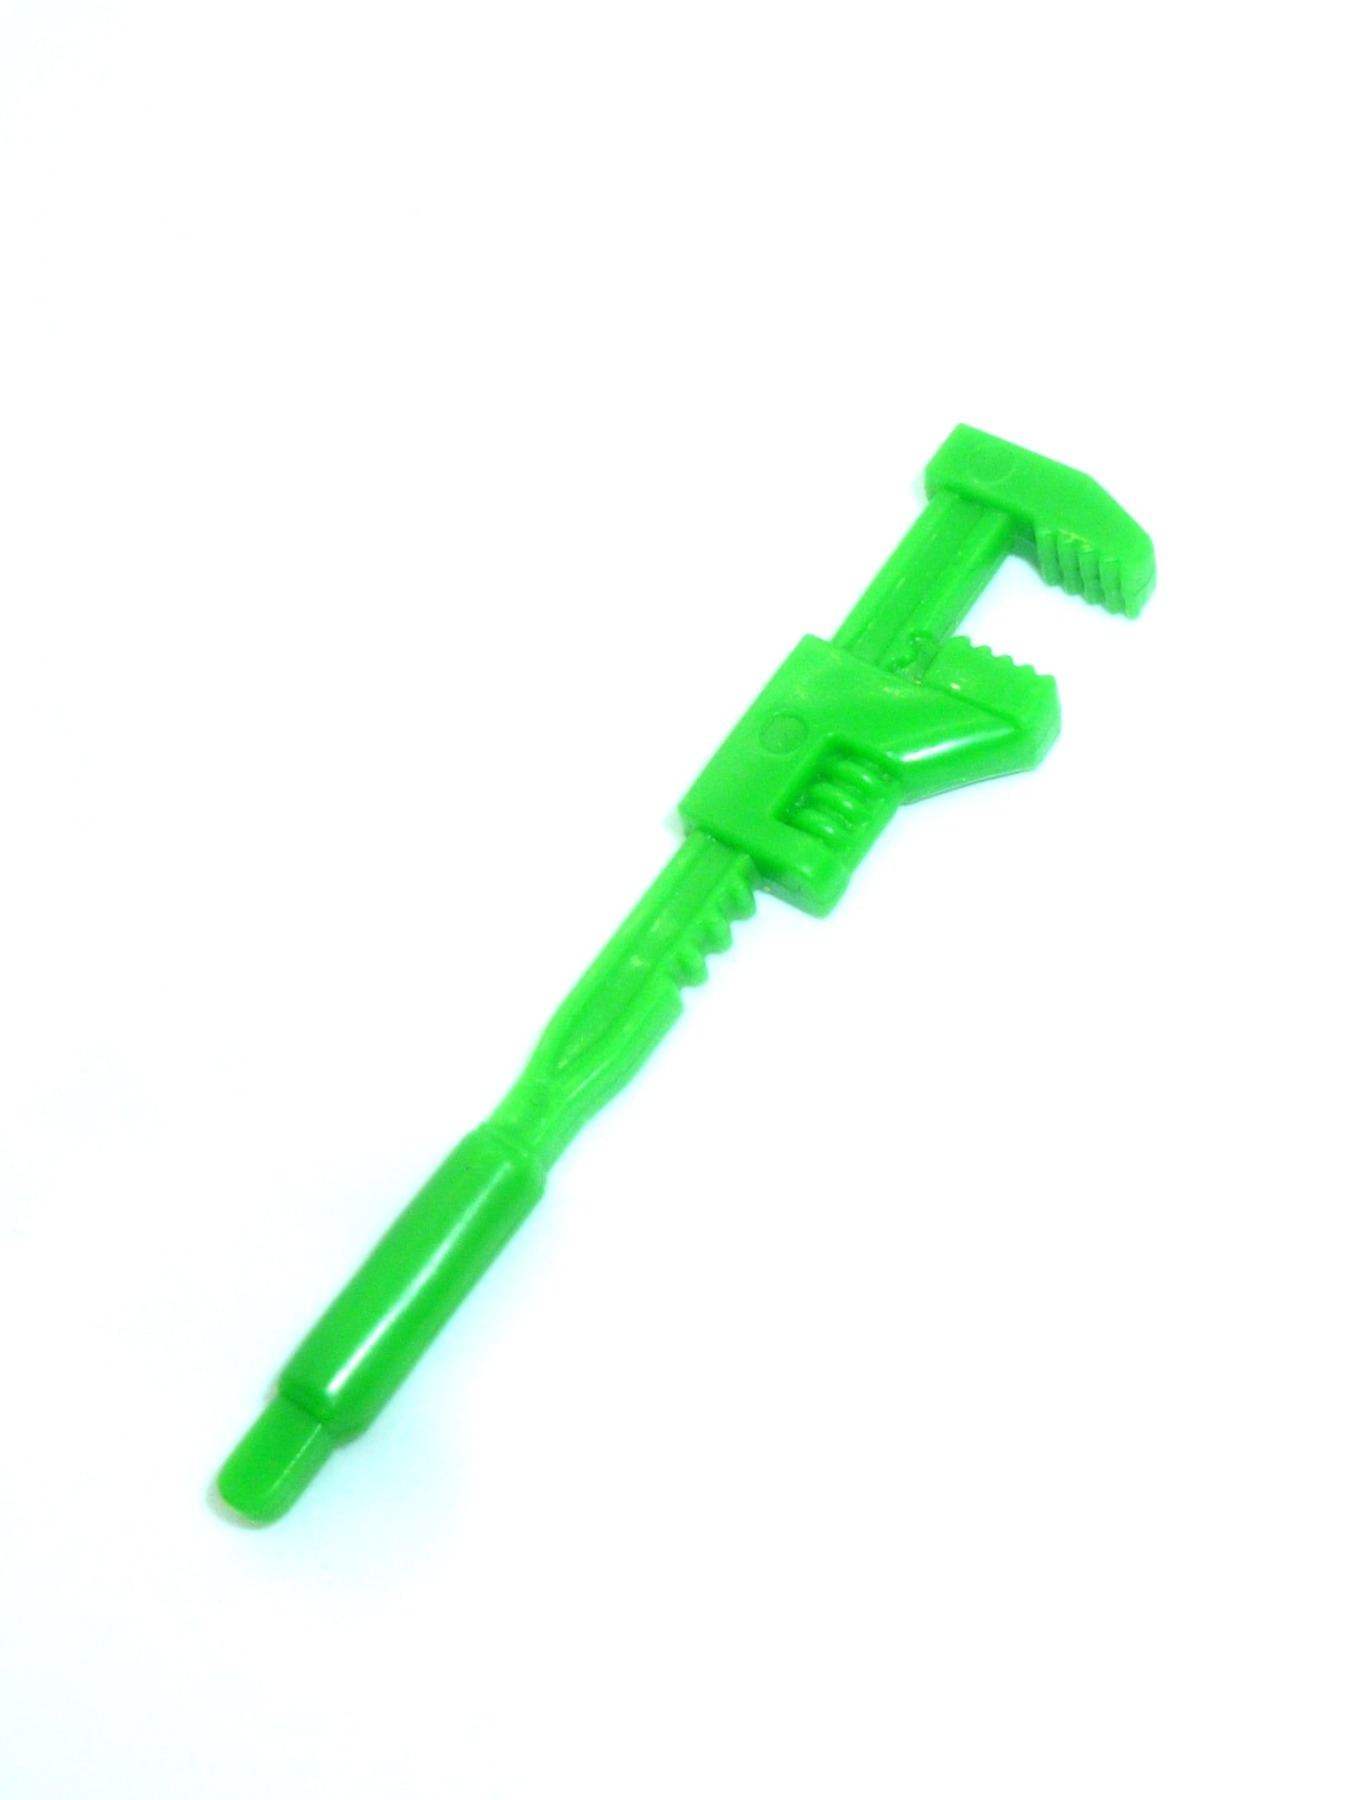 Ted - green pipe wrench accessory